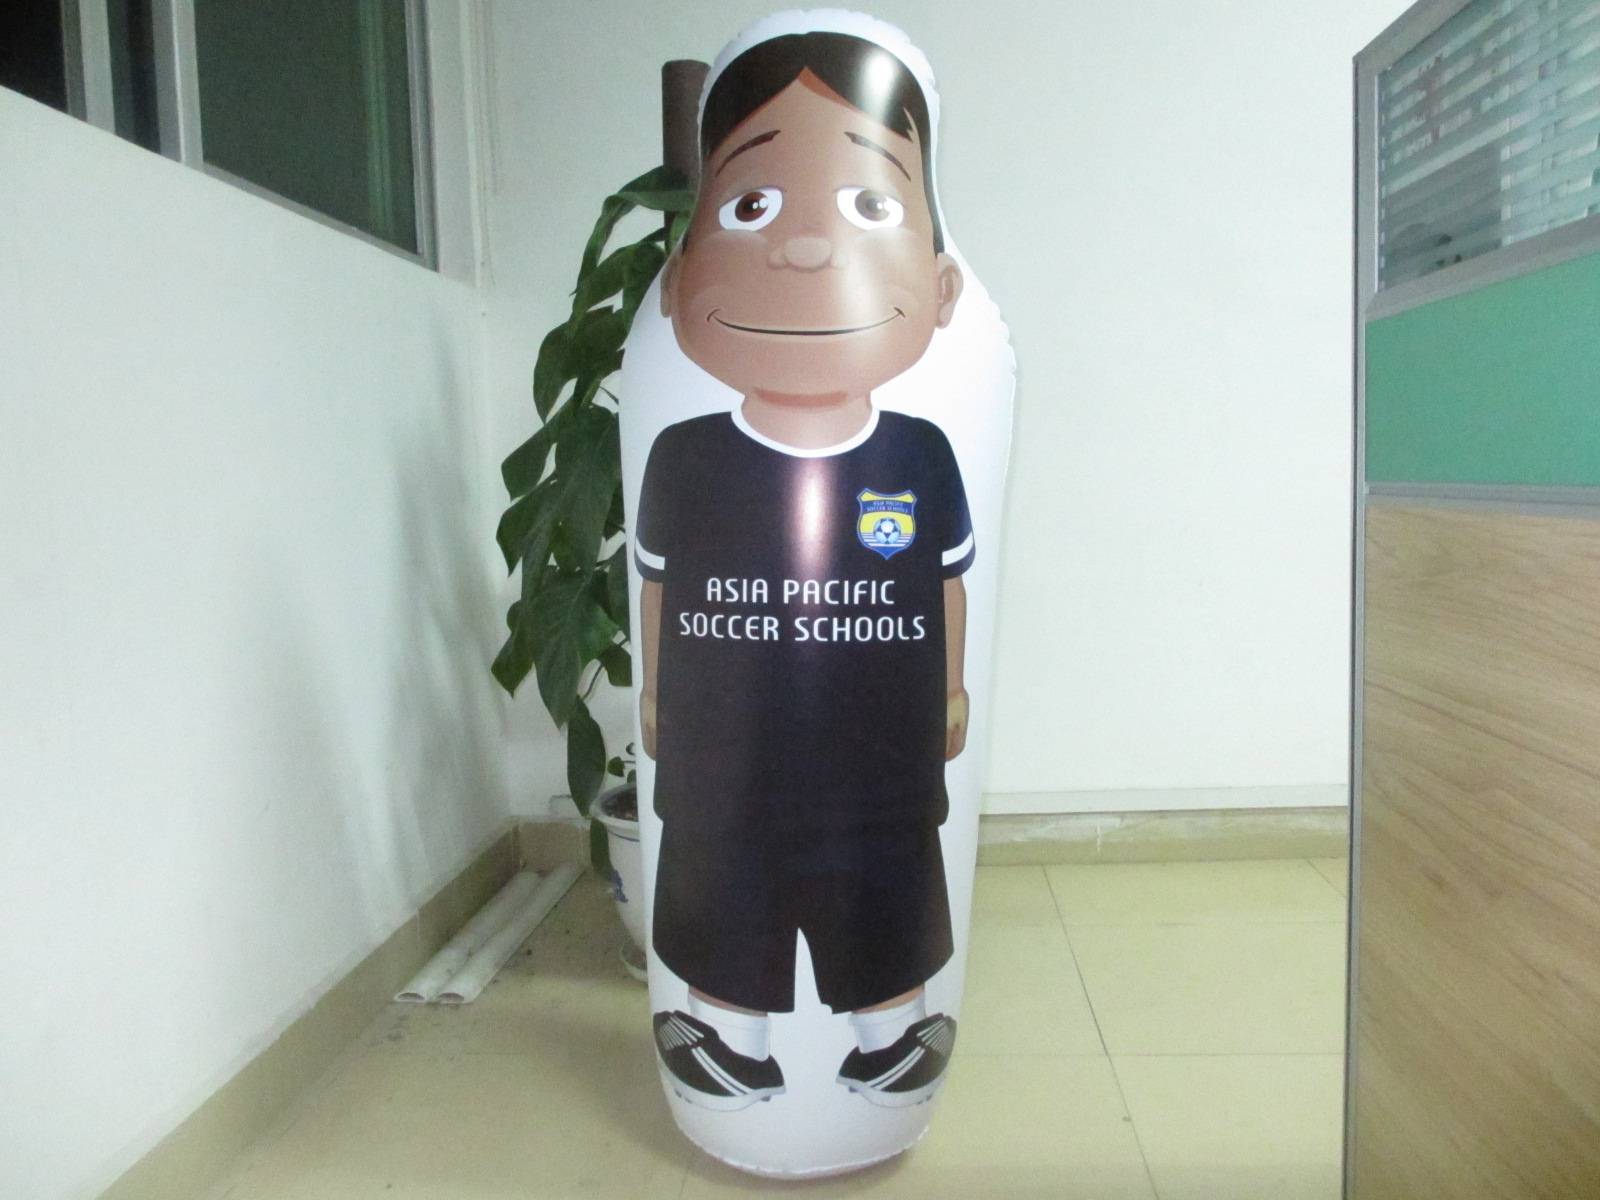 Customised Inflatable Tumbler Blow Up Bop Target Punching Bags Boxing Bounce-Back Action!